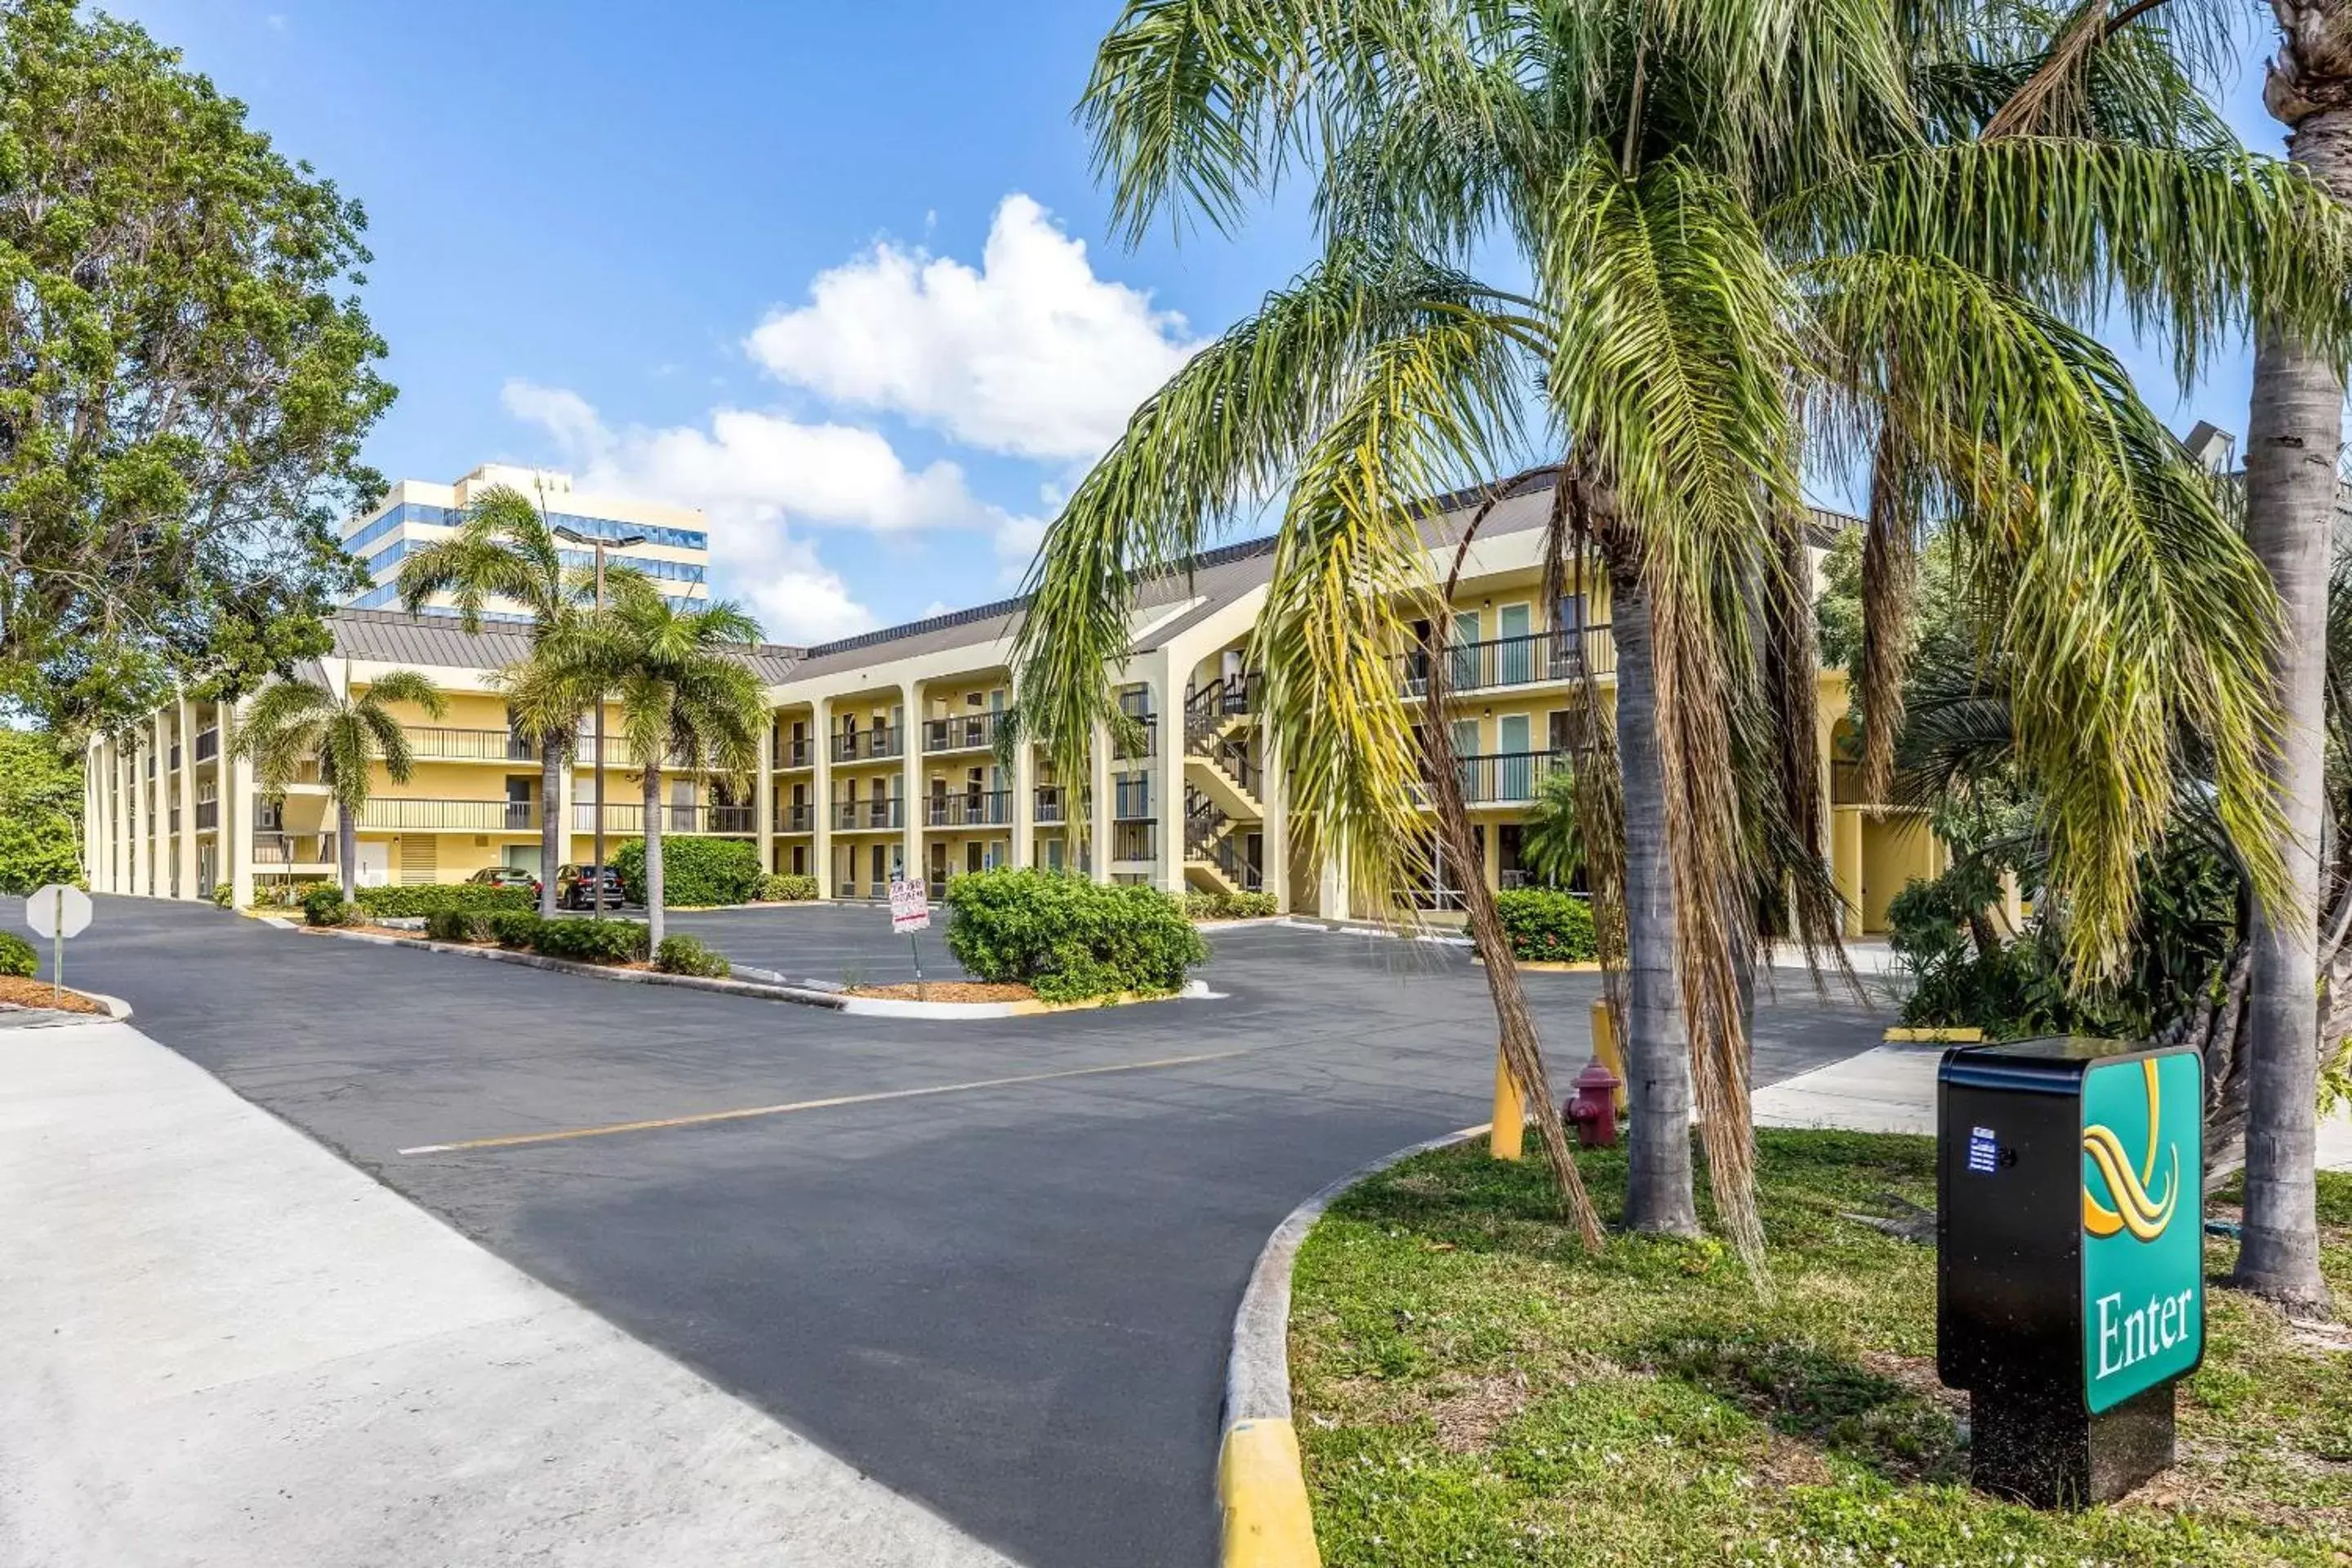 Property building in Quality Inn Palm Beach International Airport